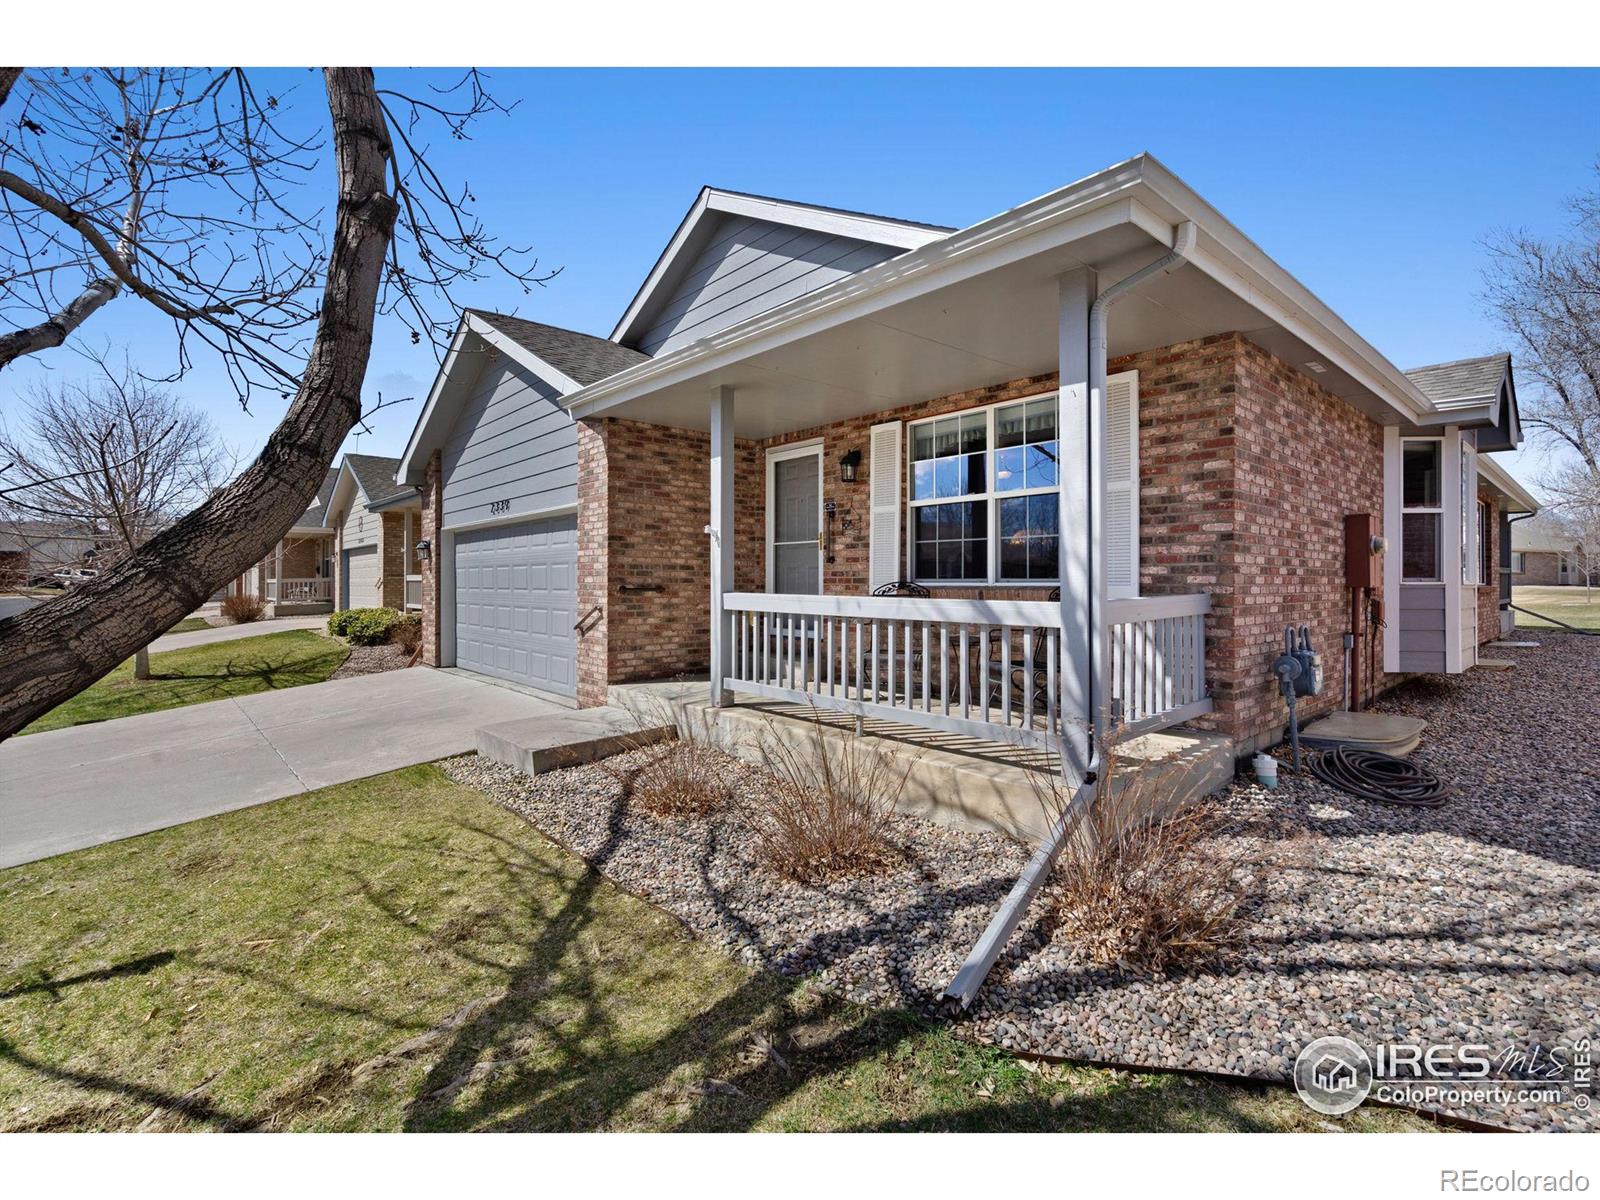 2339  lawson drive, Loveland sold home. Closed on 2024-04-30 for $485,000.